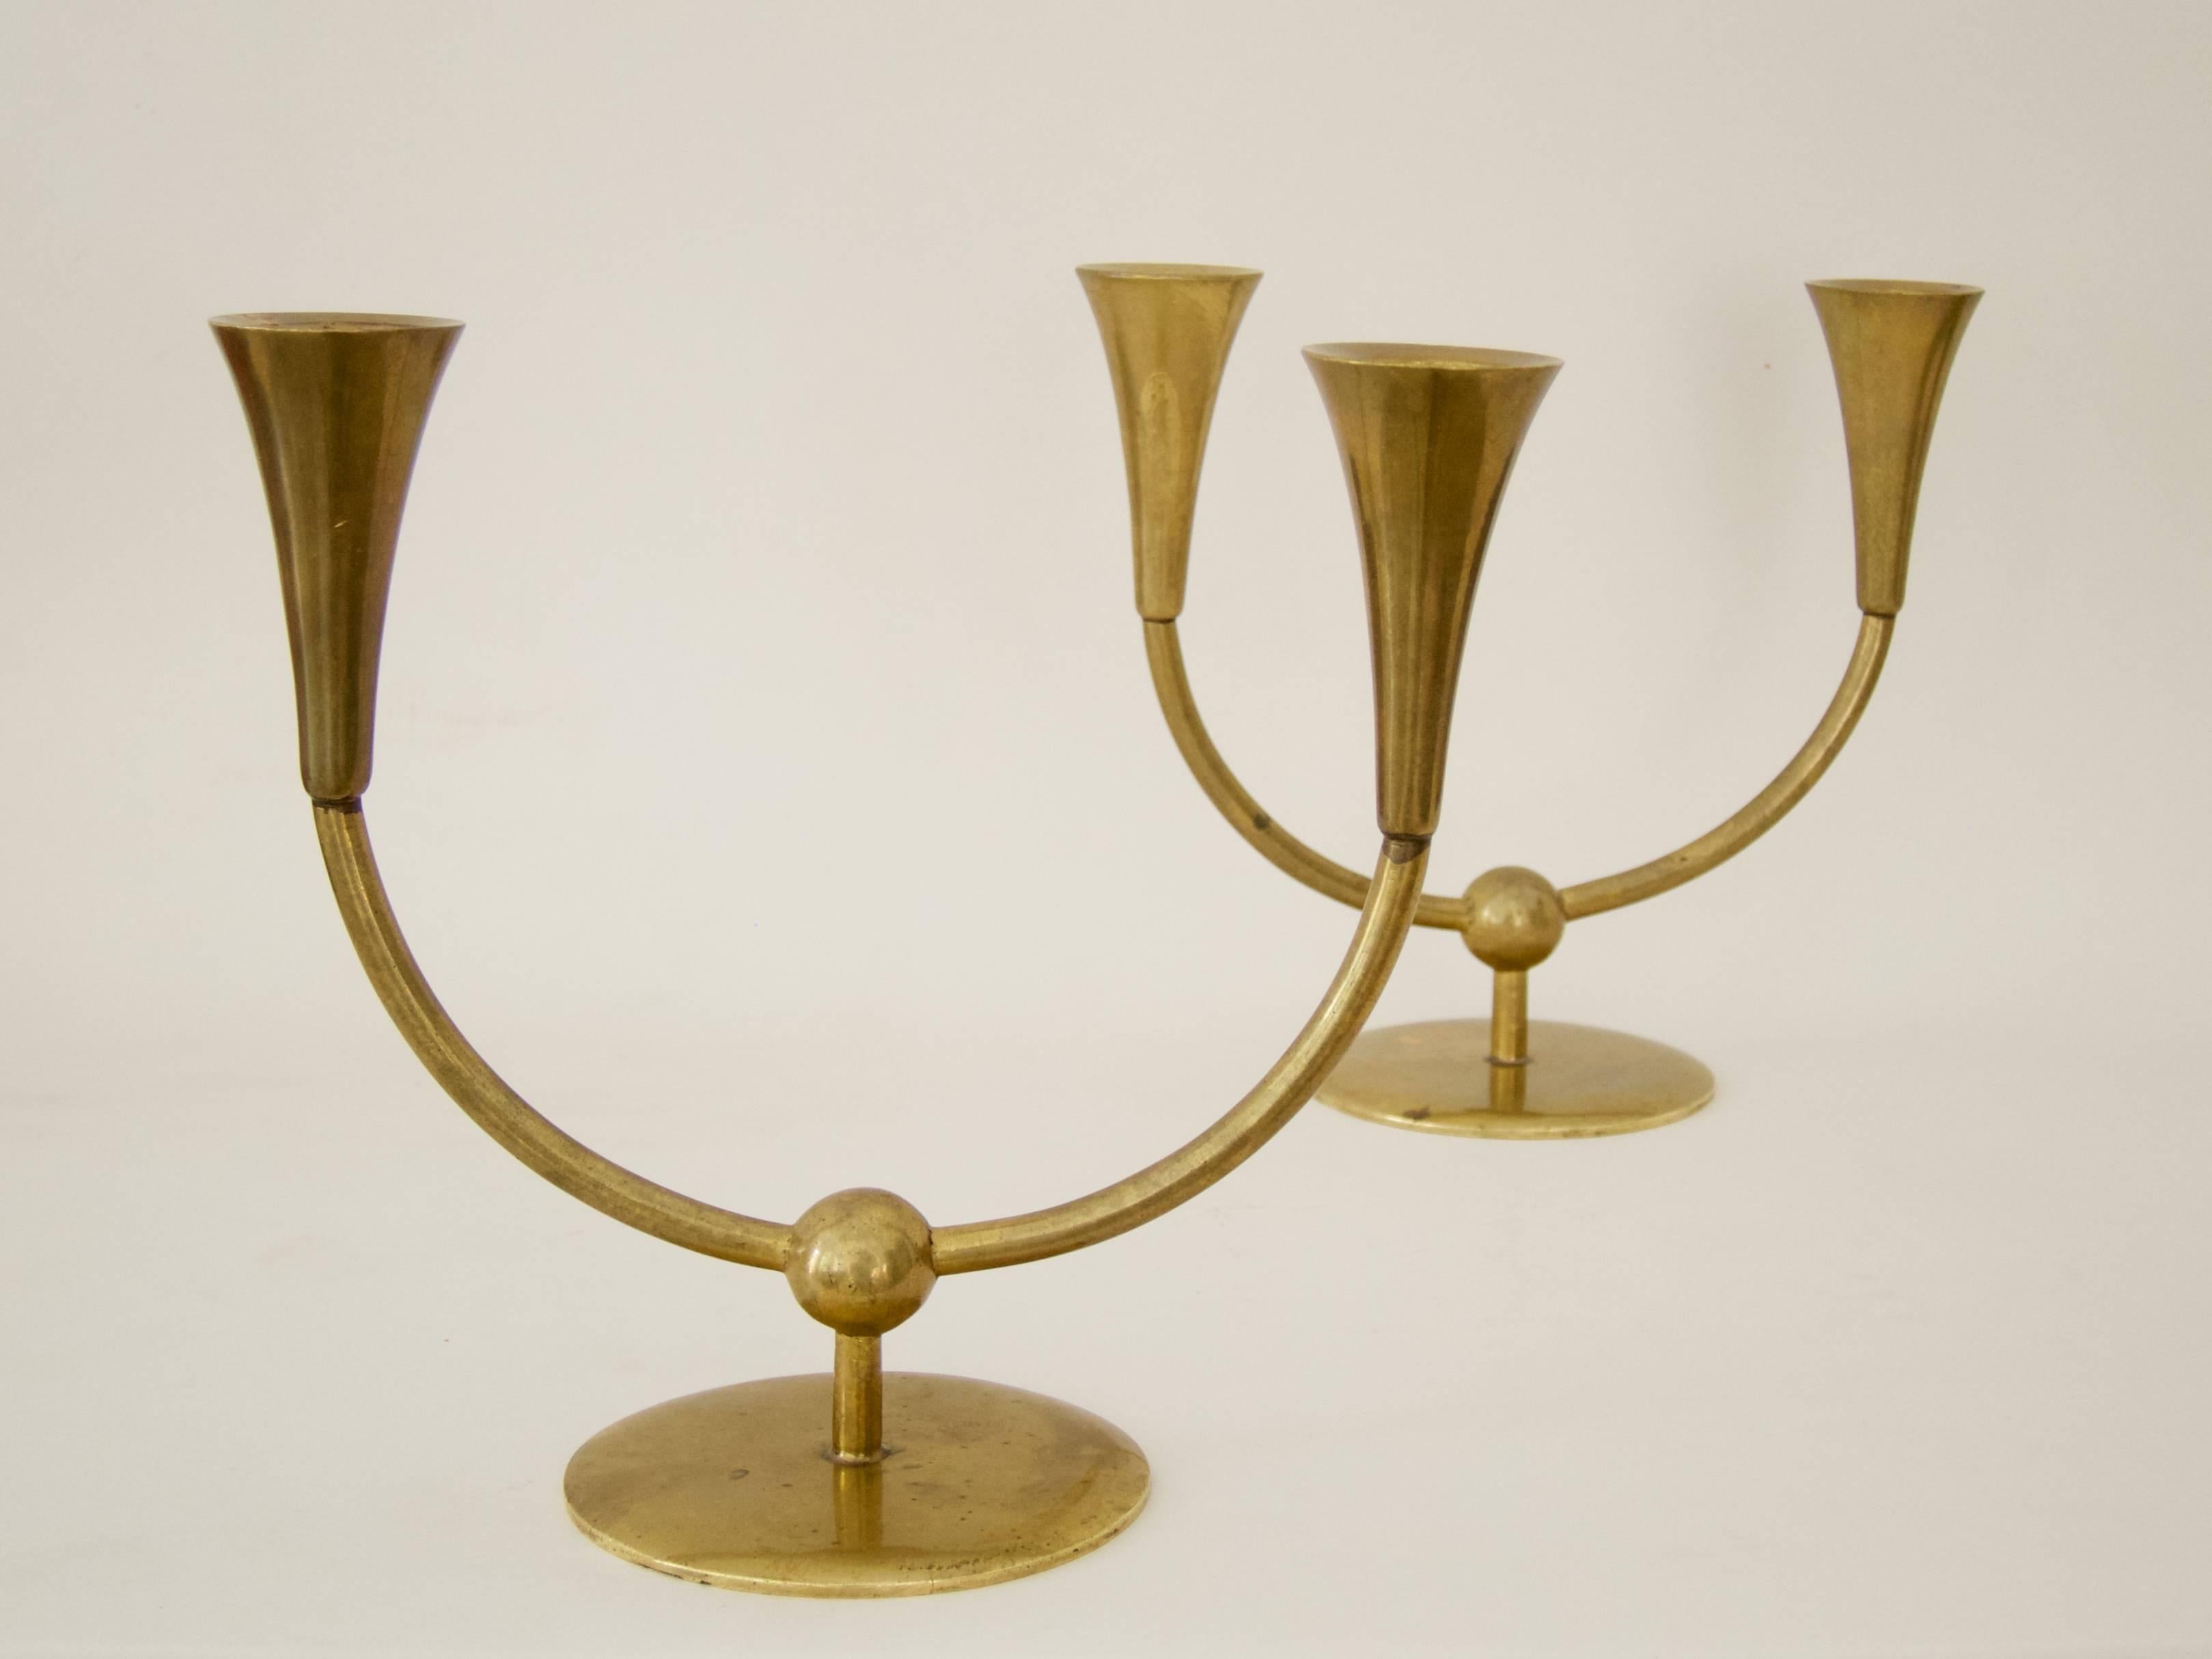 A pair of two-arm candeholders designed by the former head-workman of the Werkstätte Hagenauer, Richard Rohac.

The model numbers: 213 and 216 are engraved at the bottom of both candleholders.